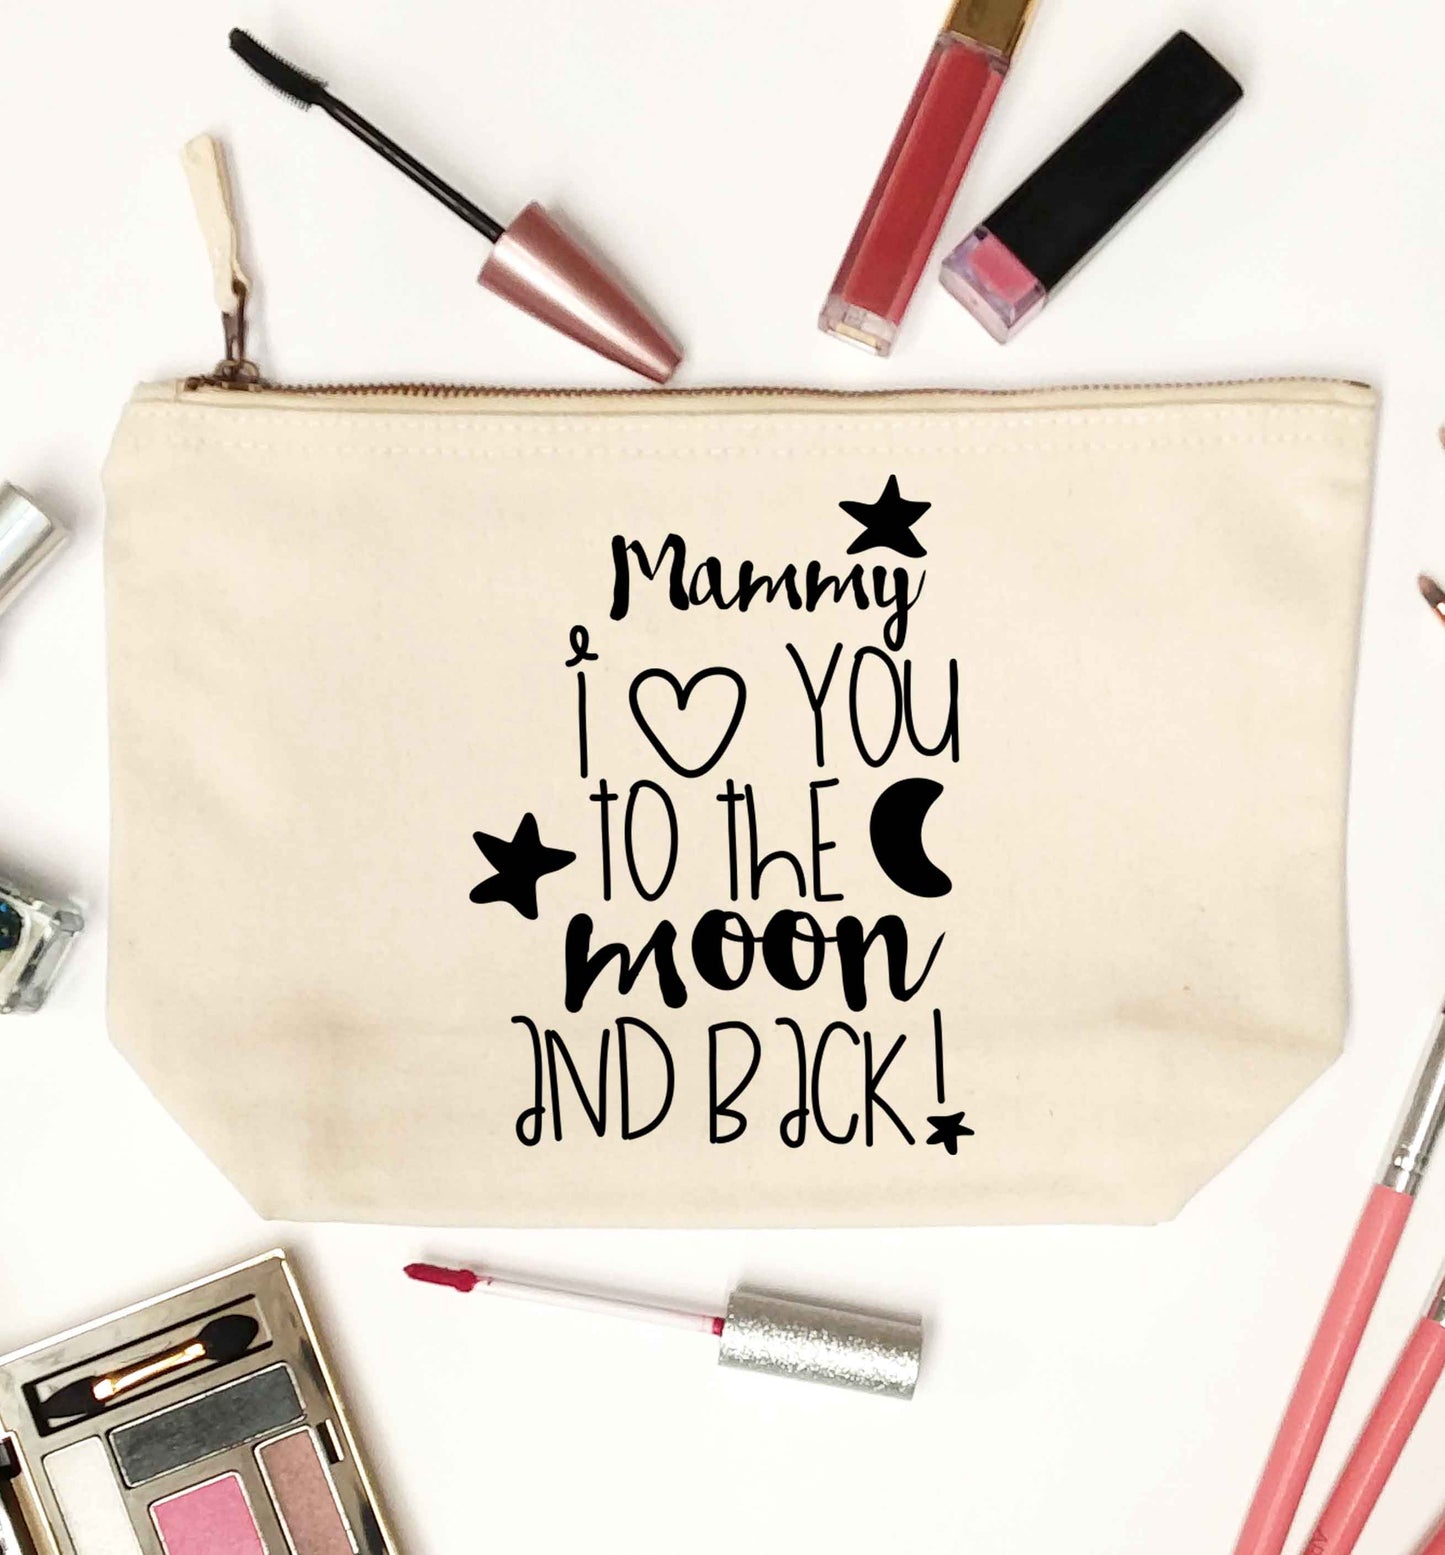 Mammy I love you to the moon and back natural makeup bag